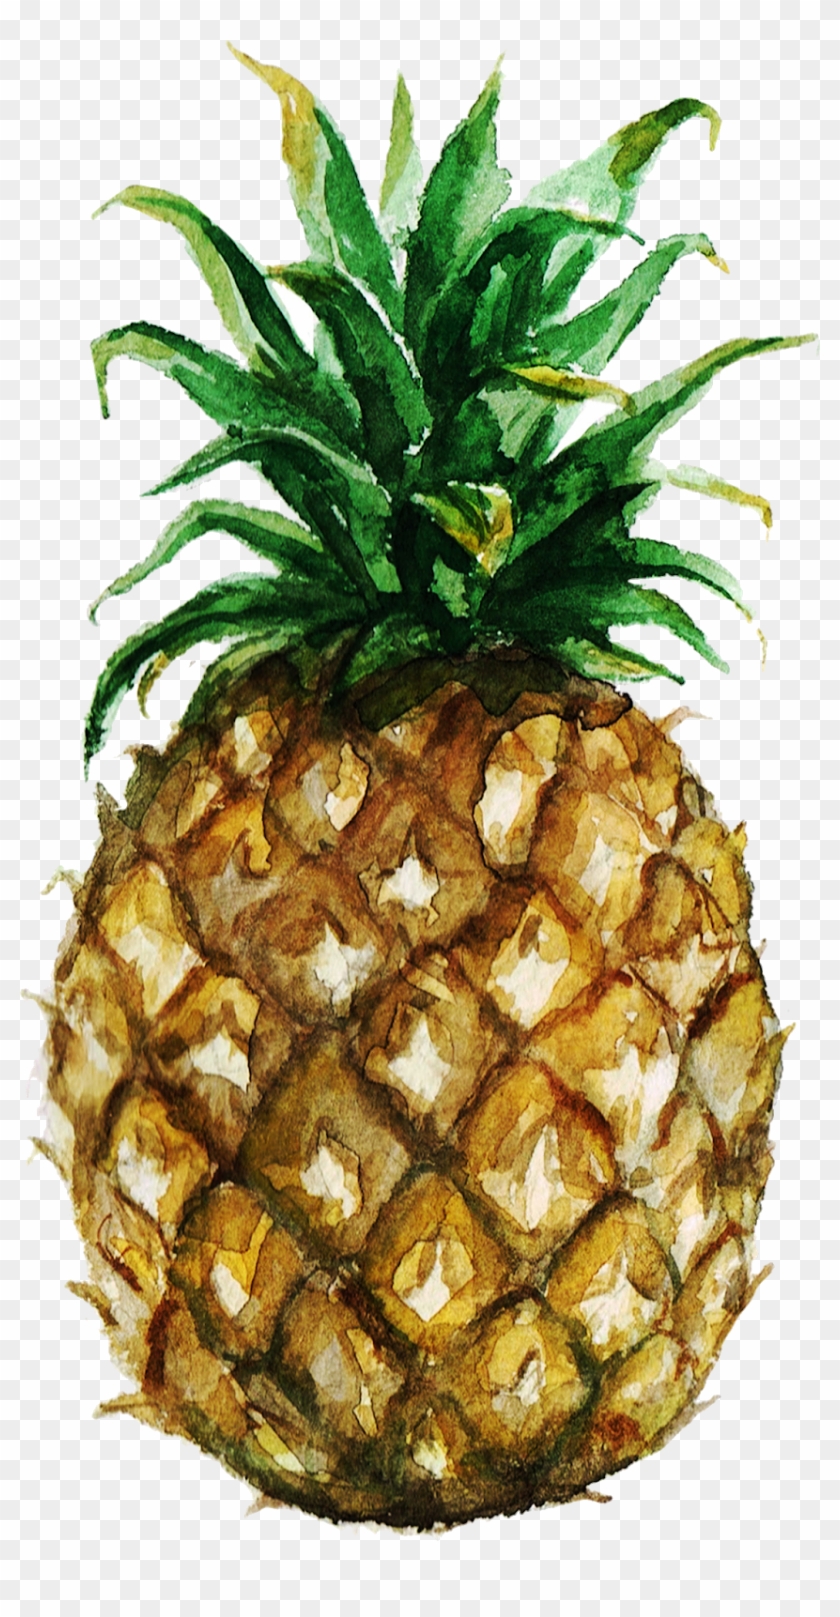 Pineapple Clip Art & Pineapple Png Image - Pineapple Watercolor Illustrations Png Transparent Png #3739883